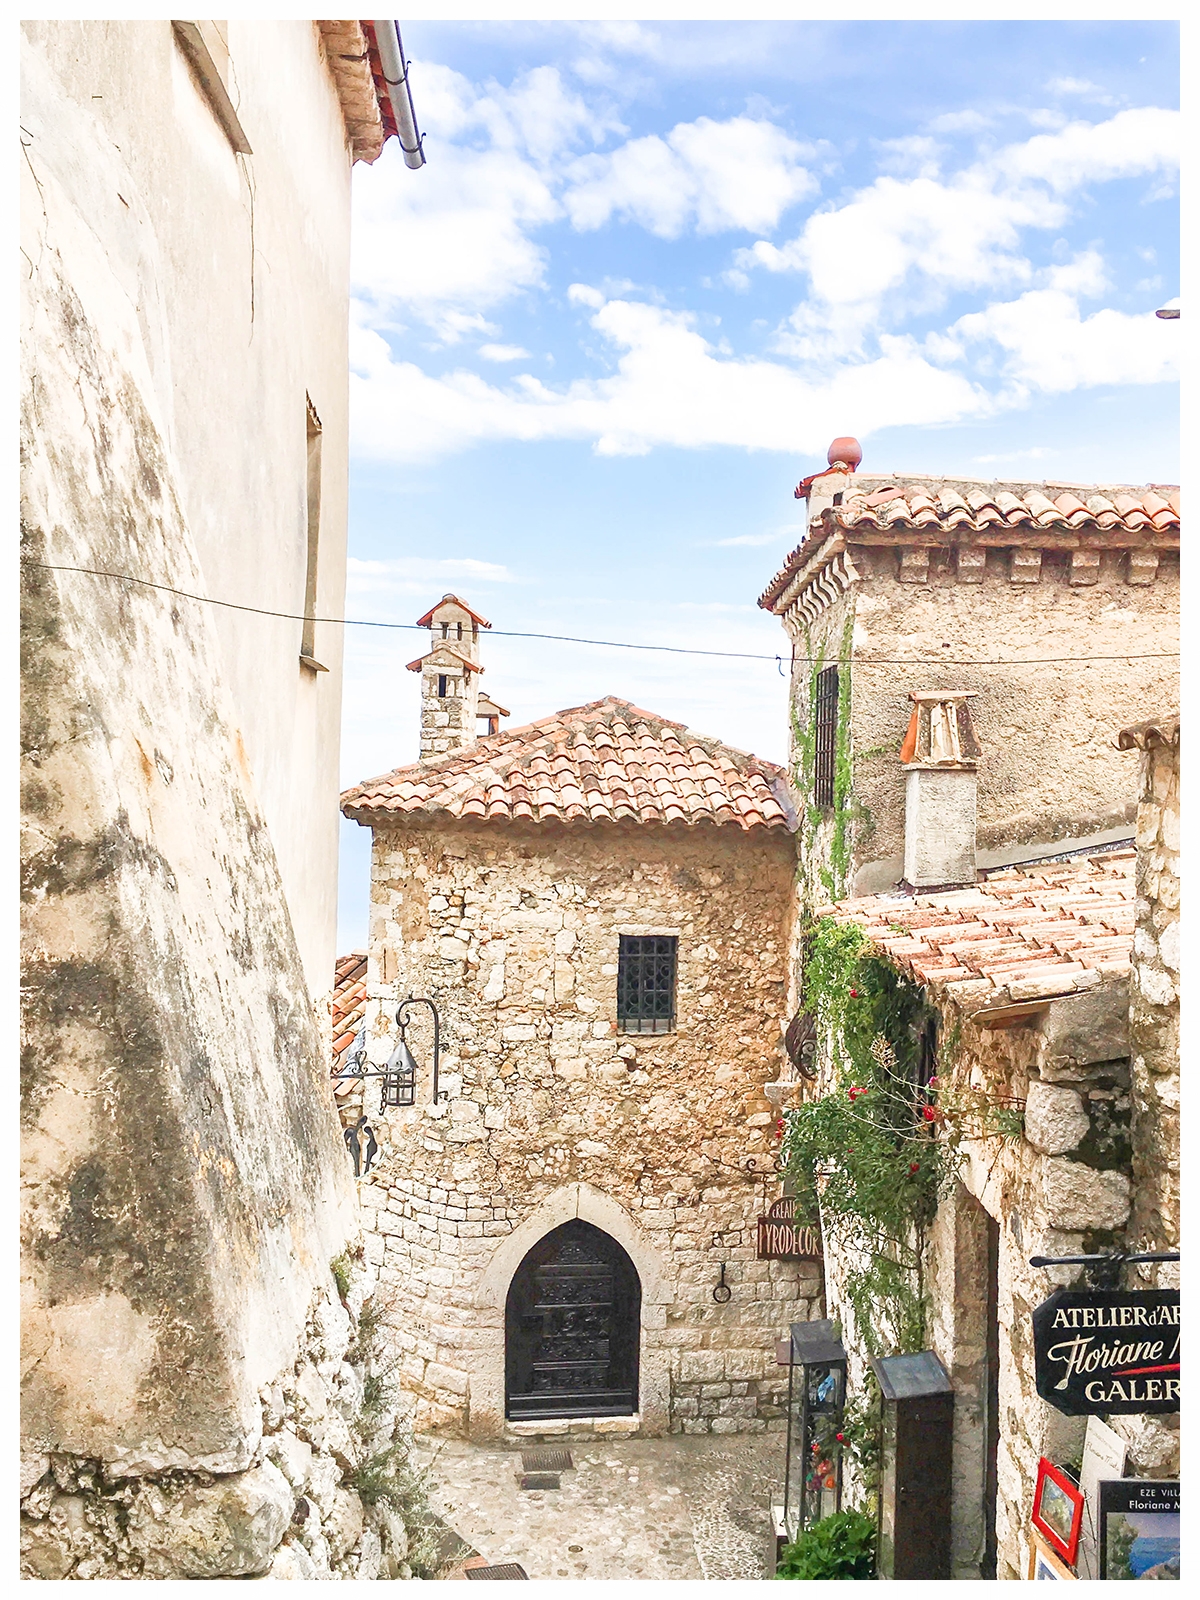 A Day Trip to Èze: The Most Charming Hilltop Village on the French Riviera | Things to do, from shopping and exploring the Jardin Exotique to visiting the best hotels and restaurants. | Èze, France Travel Guide